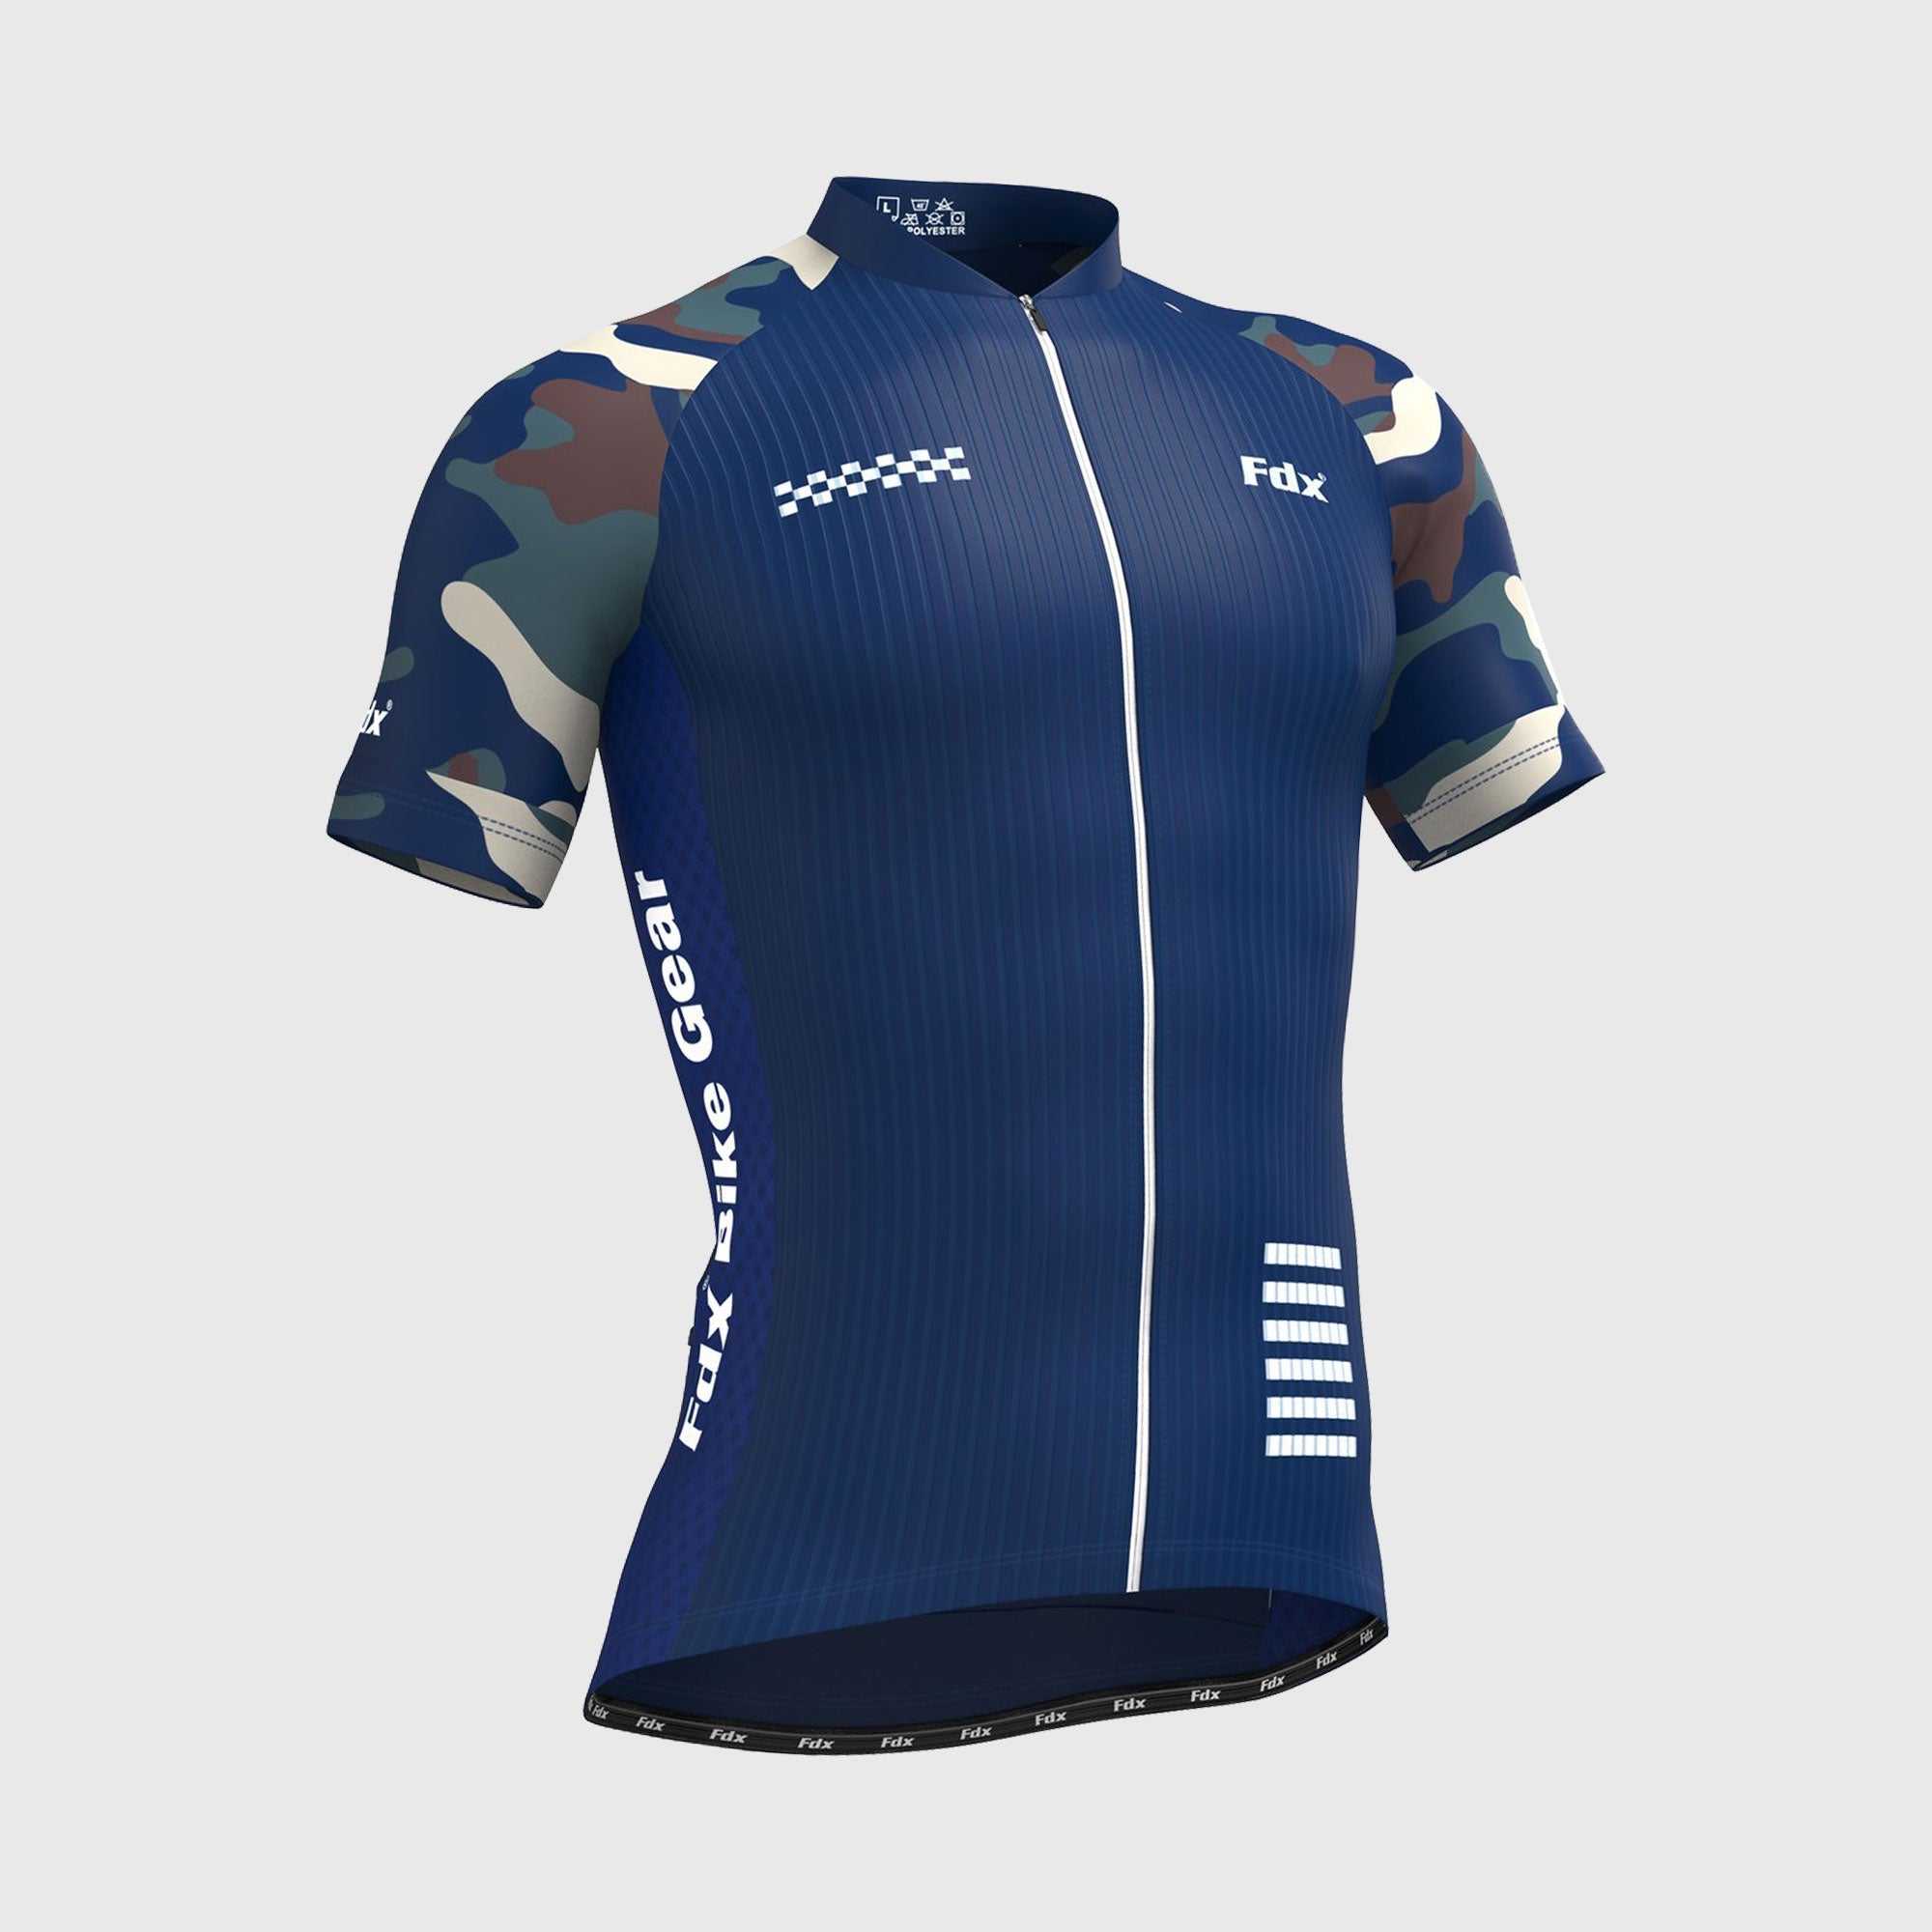 Fdx Camouflage Blue Men's Short Sleeve Summer Cycling Jersey